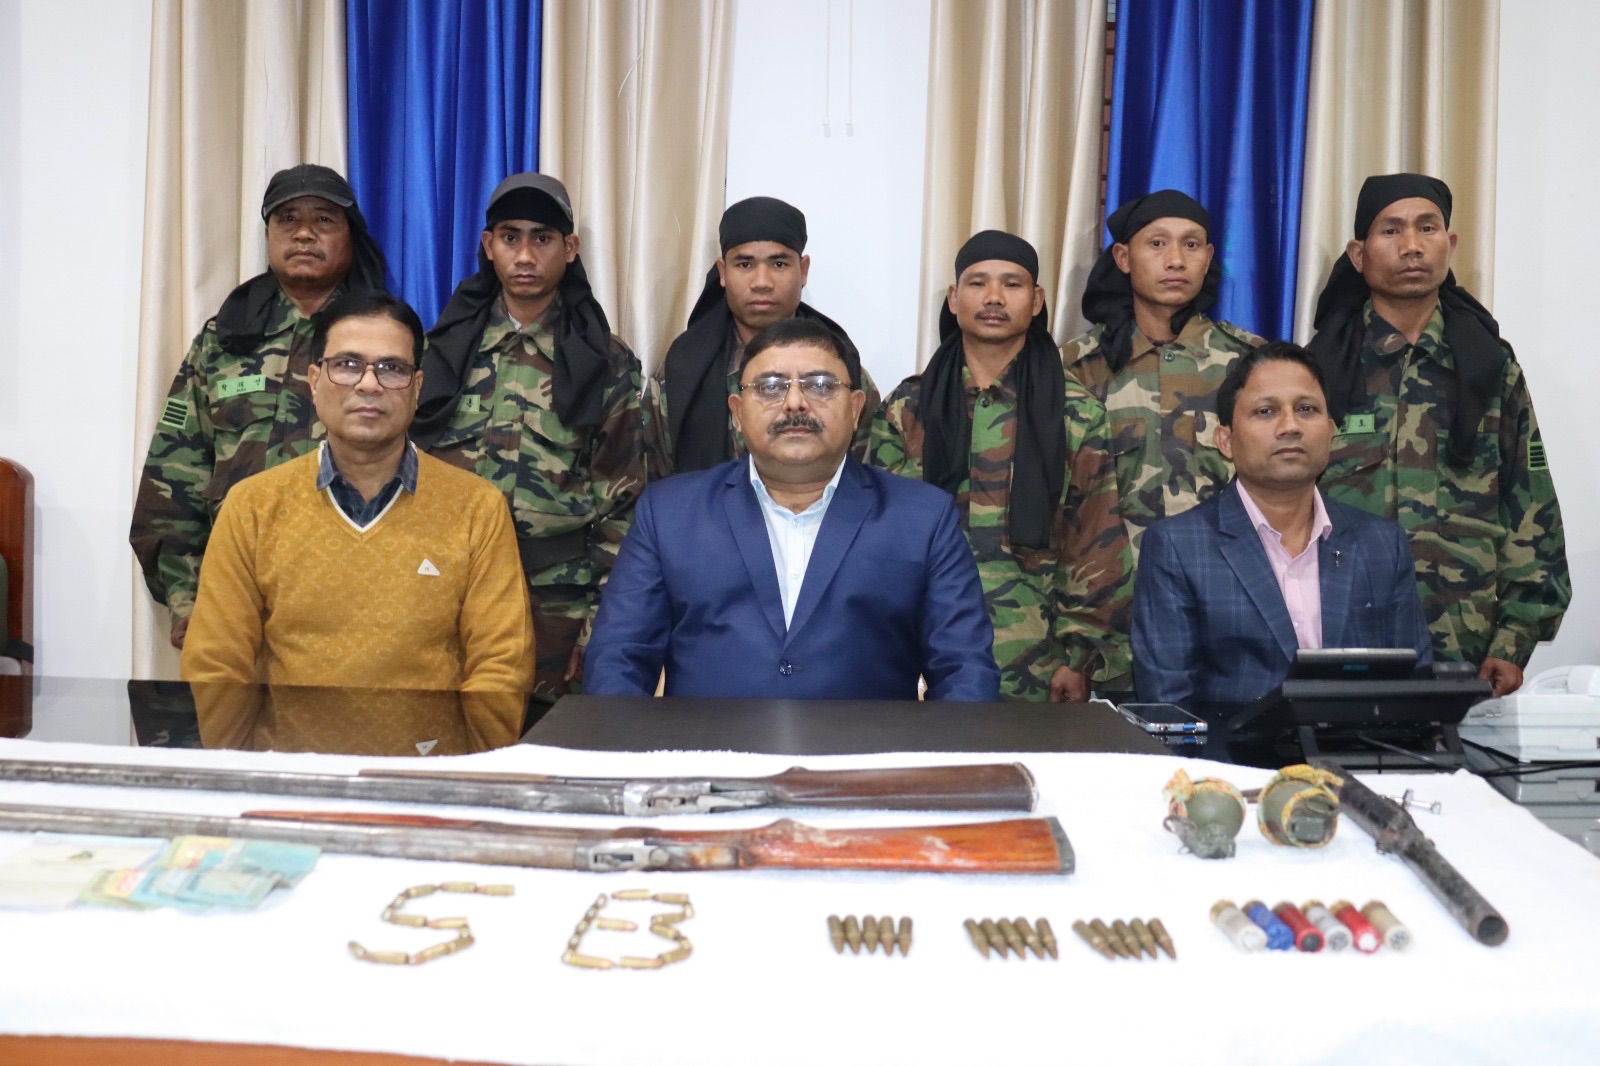 Tripura: NLFT Surrender of 6 Extremists with weapons